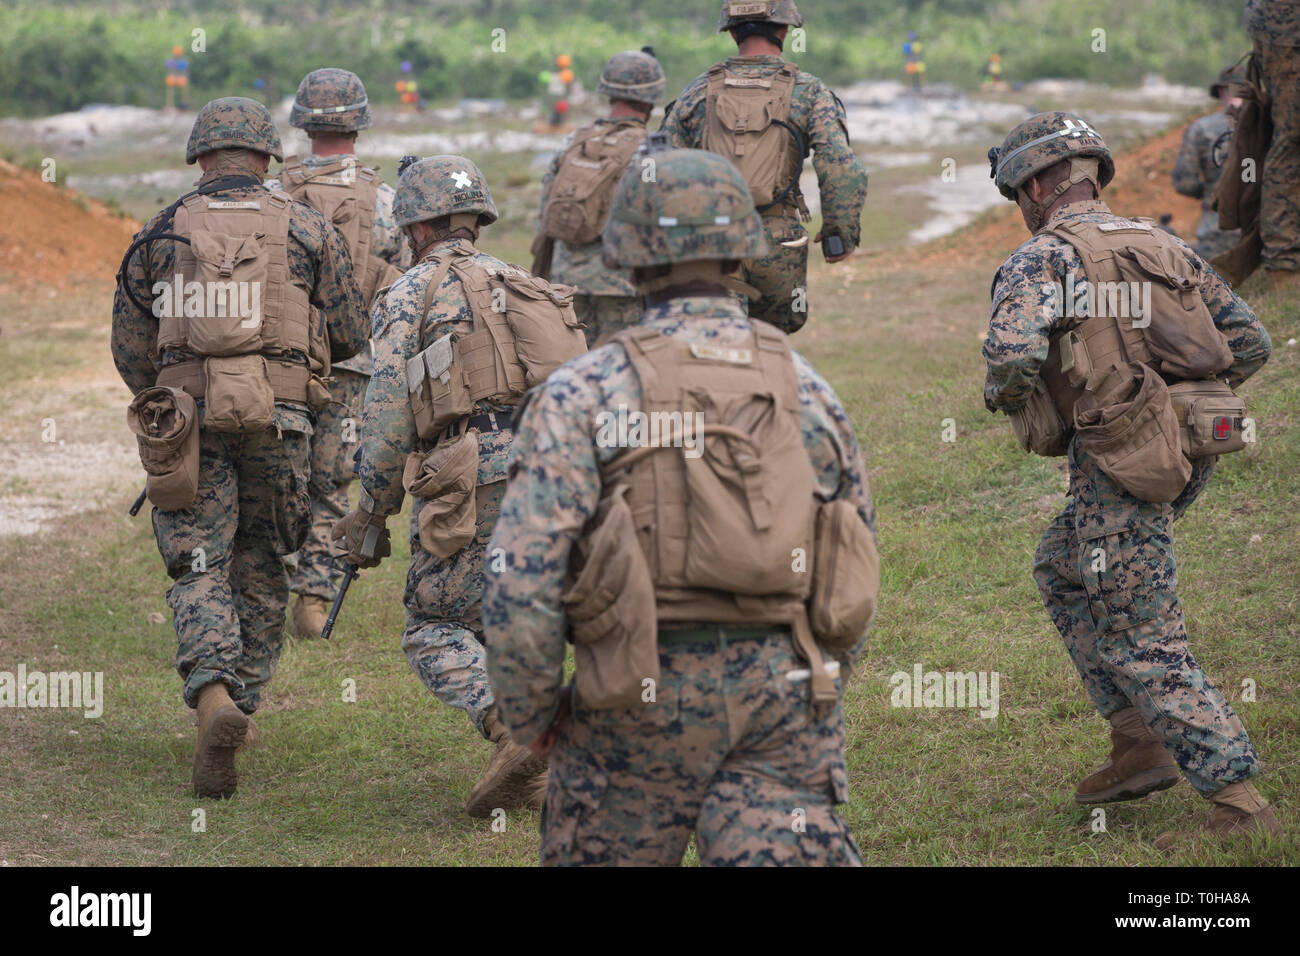 Marines with Alpha Company, Battlion Landing Team, 1st Battalion, 4th Marines, the “China Marines,” run toward the firing line during live-fire training at Anderson Air Force Base, Guam, March 12, 2019. Alpha Company Marines, the small boat raid specialists for BLT 1/4, the Ground Combat Element for the 31st Marine Expeditionary Unit, conducted two weeks of unit-level training on Guam. The 31st MEU, the Marine Corps’ only continuously forward-deployed MEU partnering with the U.S. Navy's Amphibious Squadron 11, provides a flexible and lethal force ready to perform a wide range of military opera Stock Photo